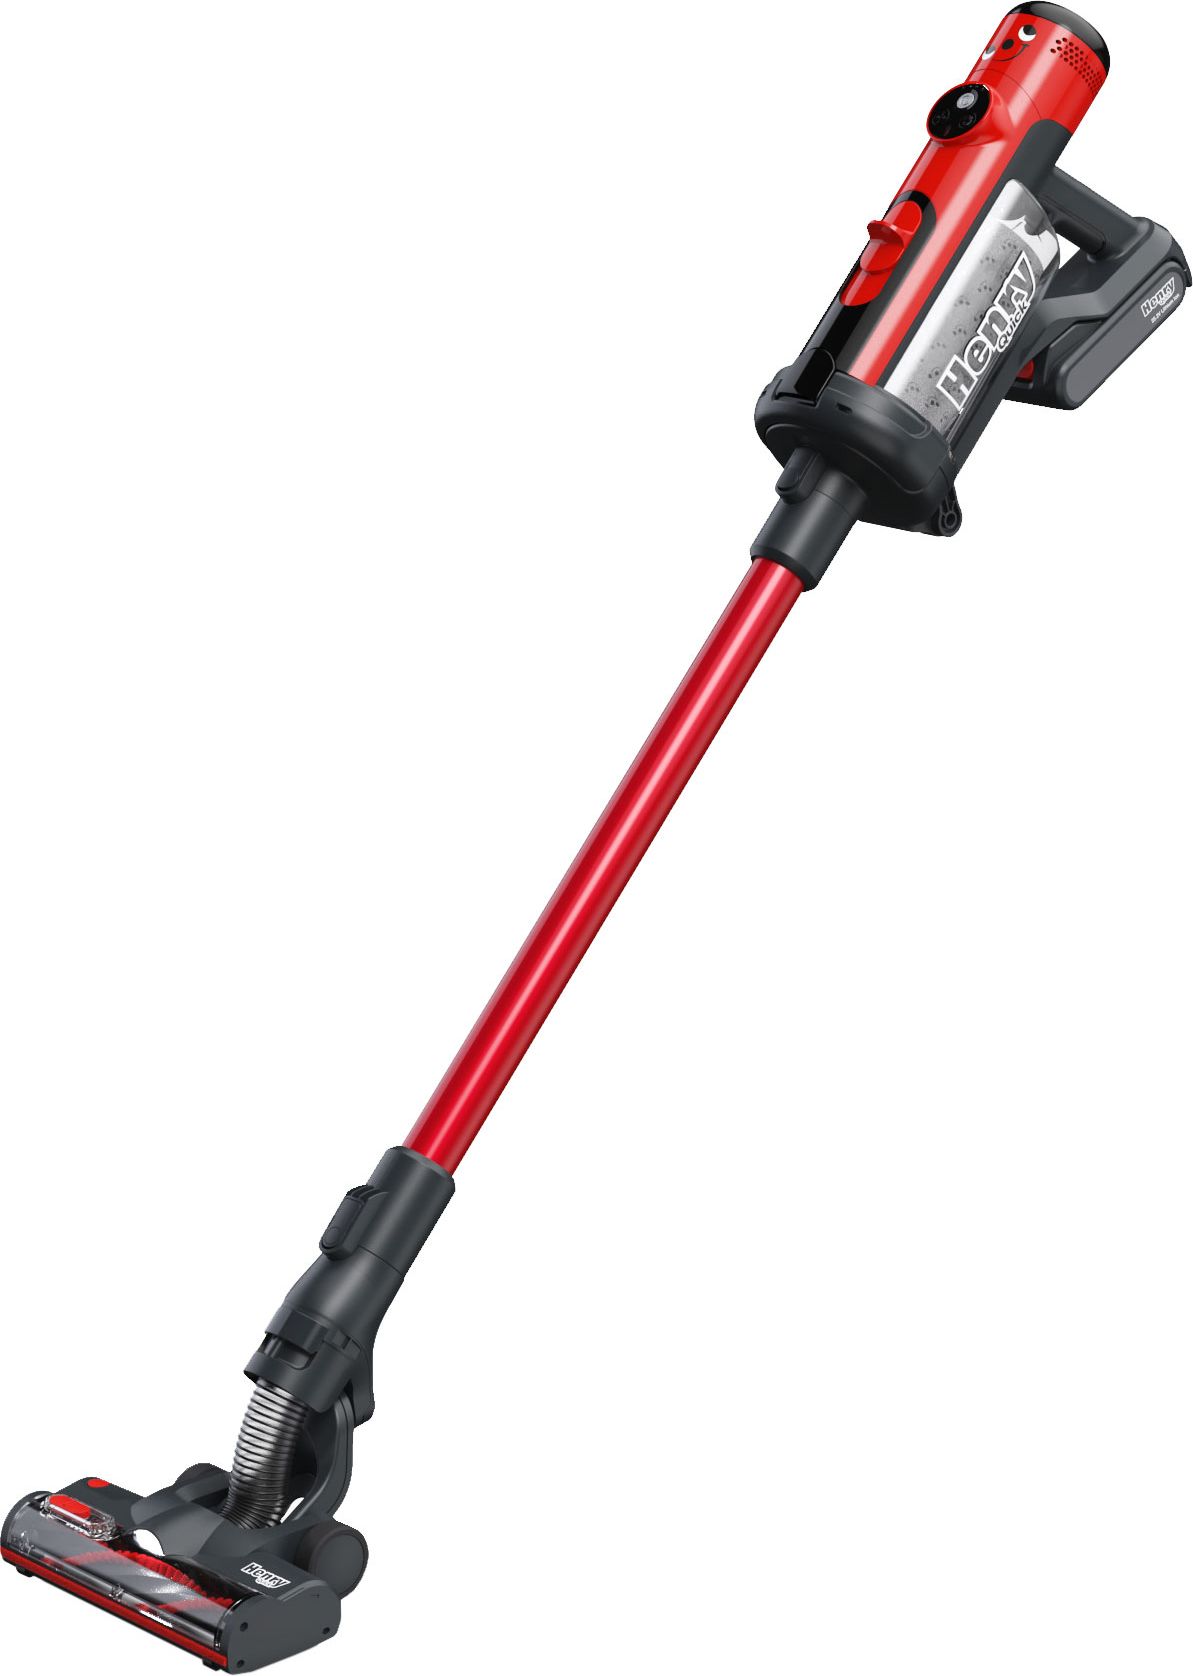 Henry Quick 916177 Cordless Bagged Vacuum Cleaner with up to 70 Minutes Run Time - Red, Red